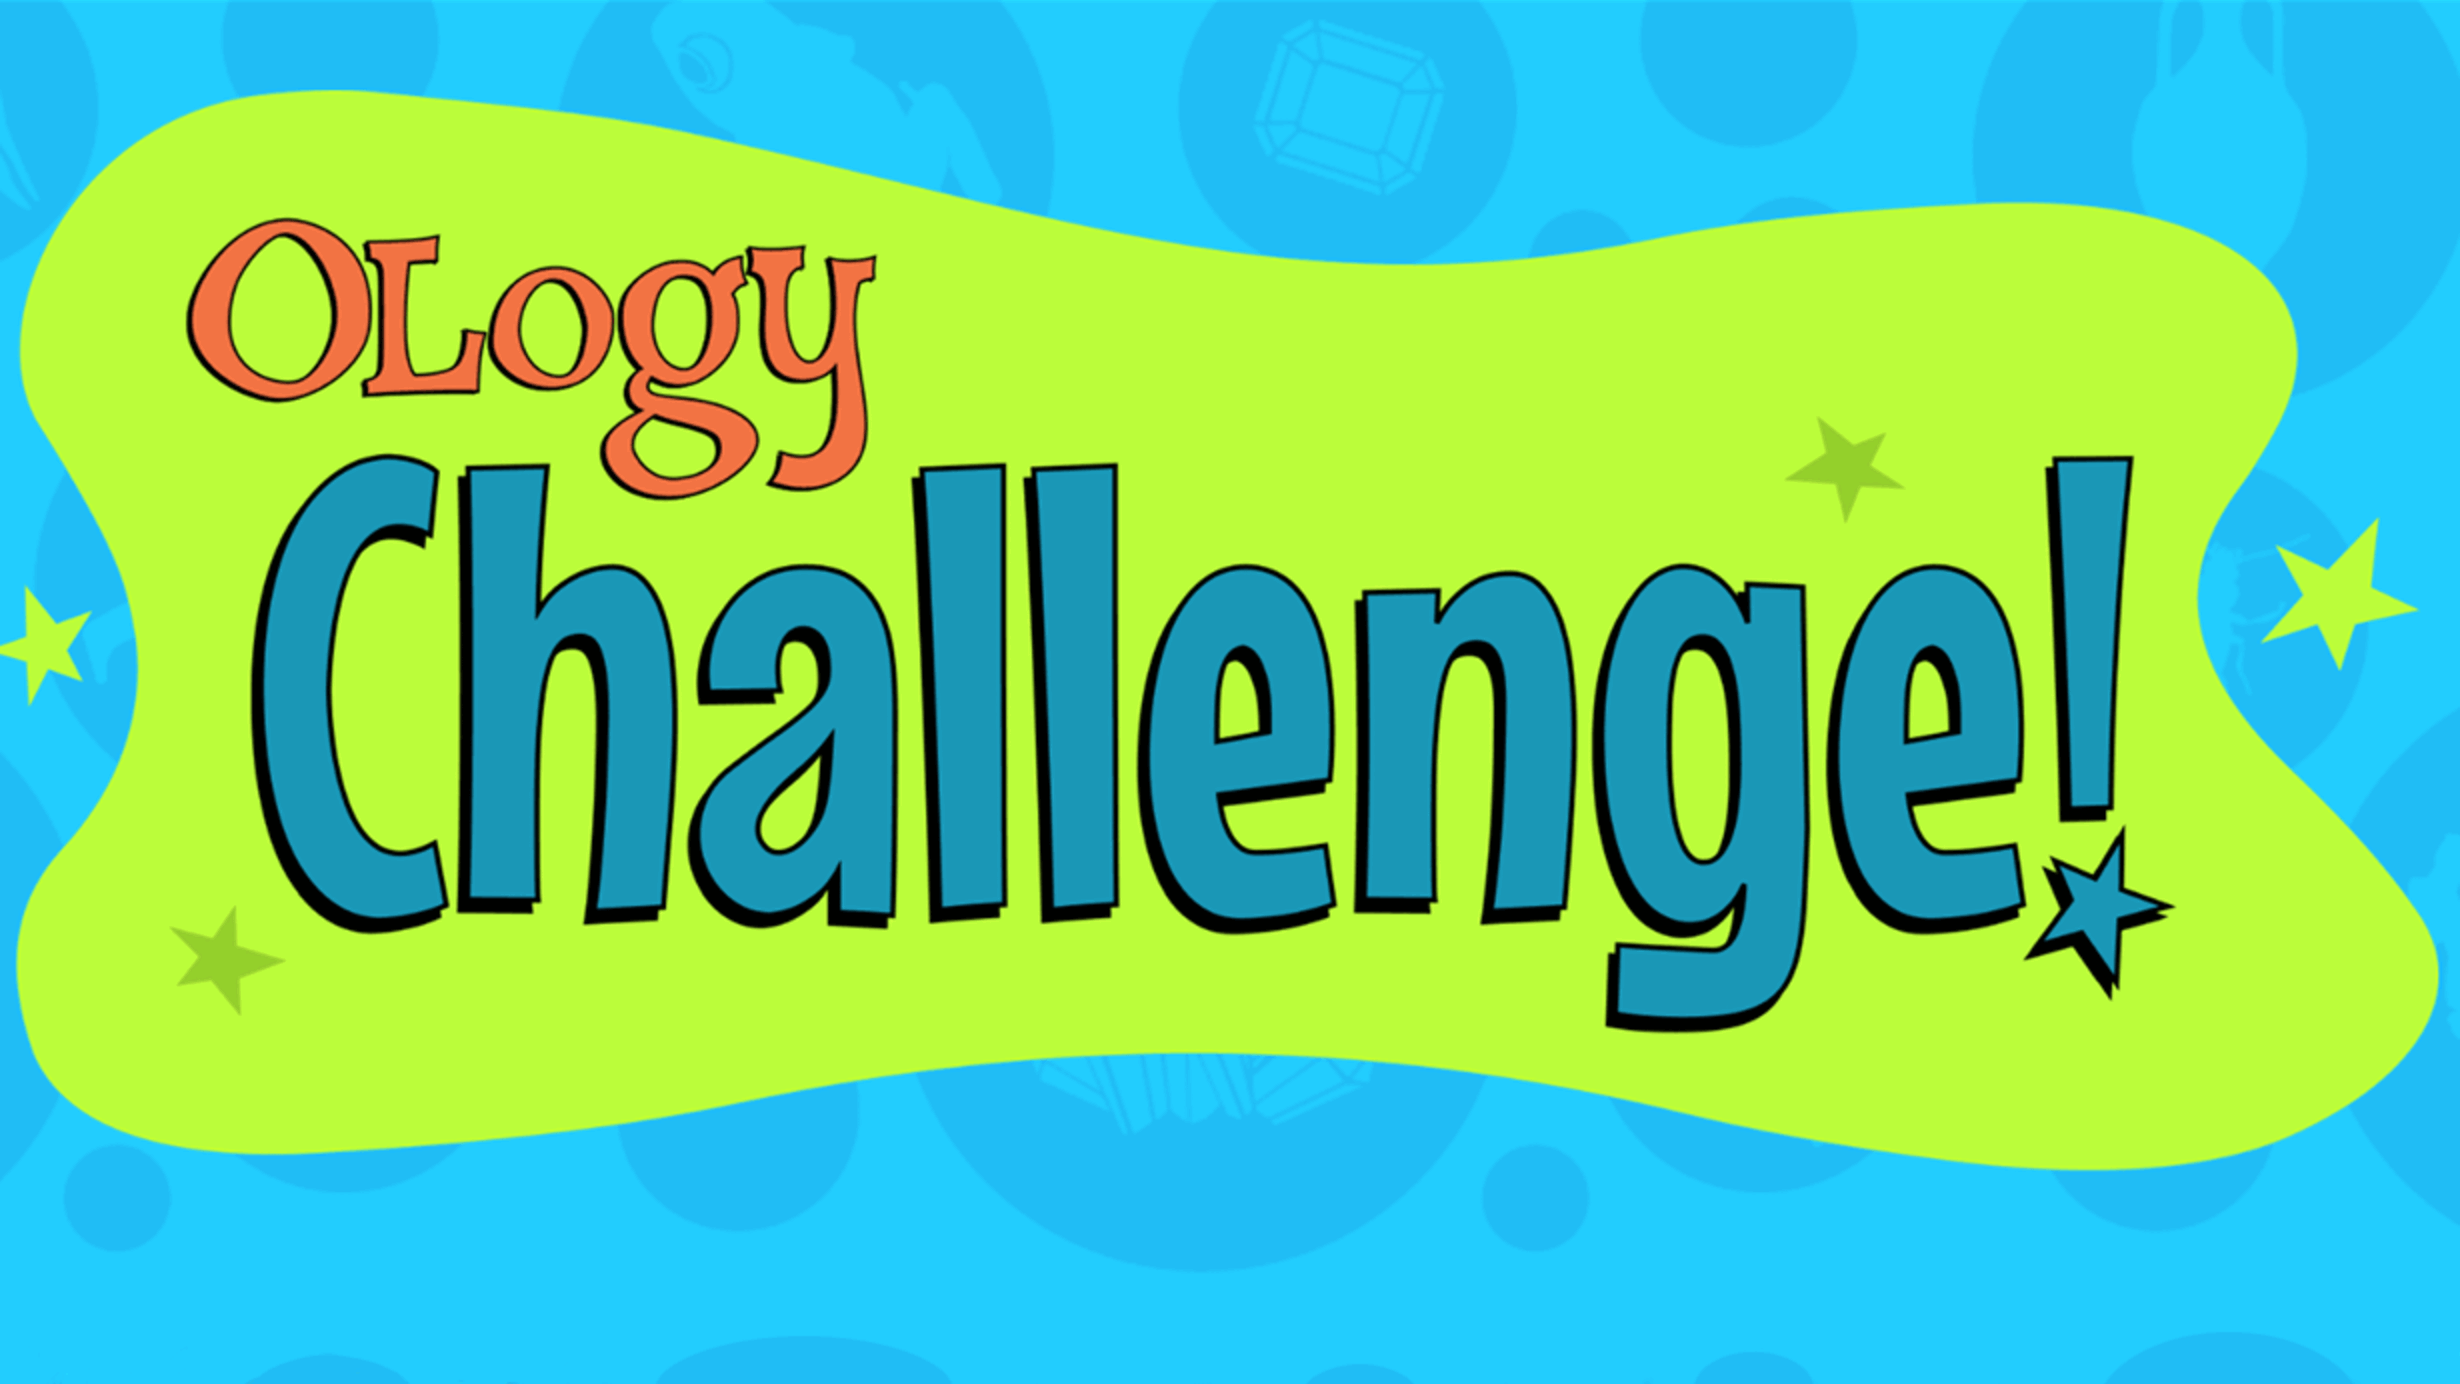 ology-challeng-1230-692